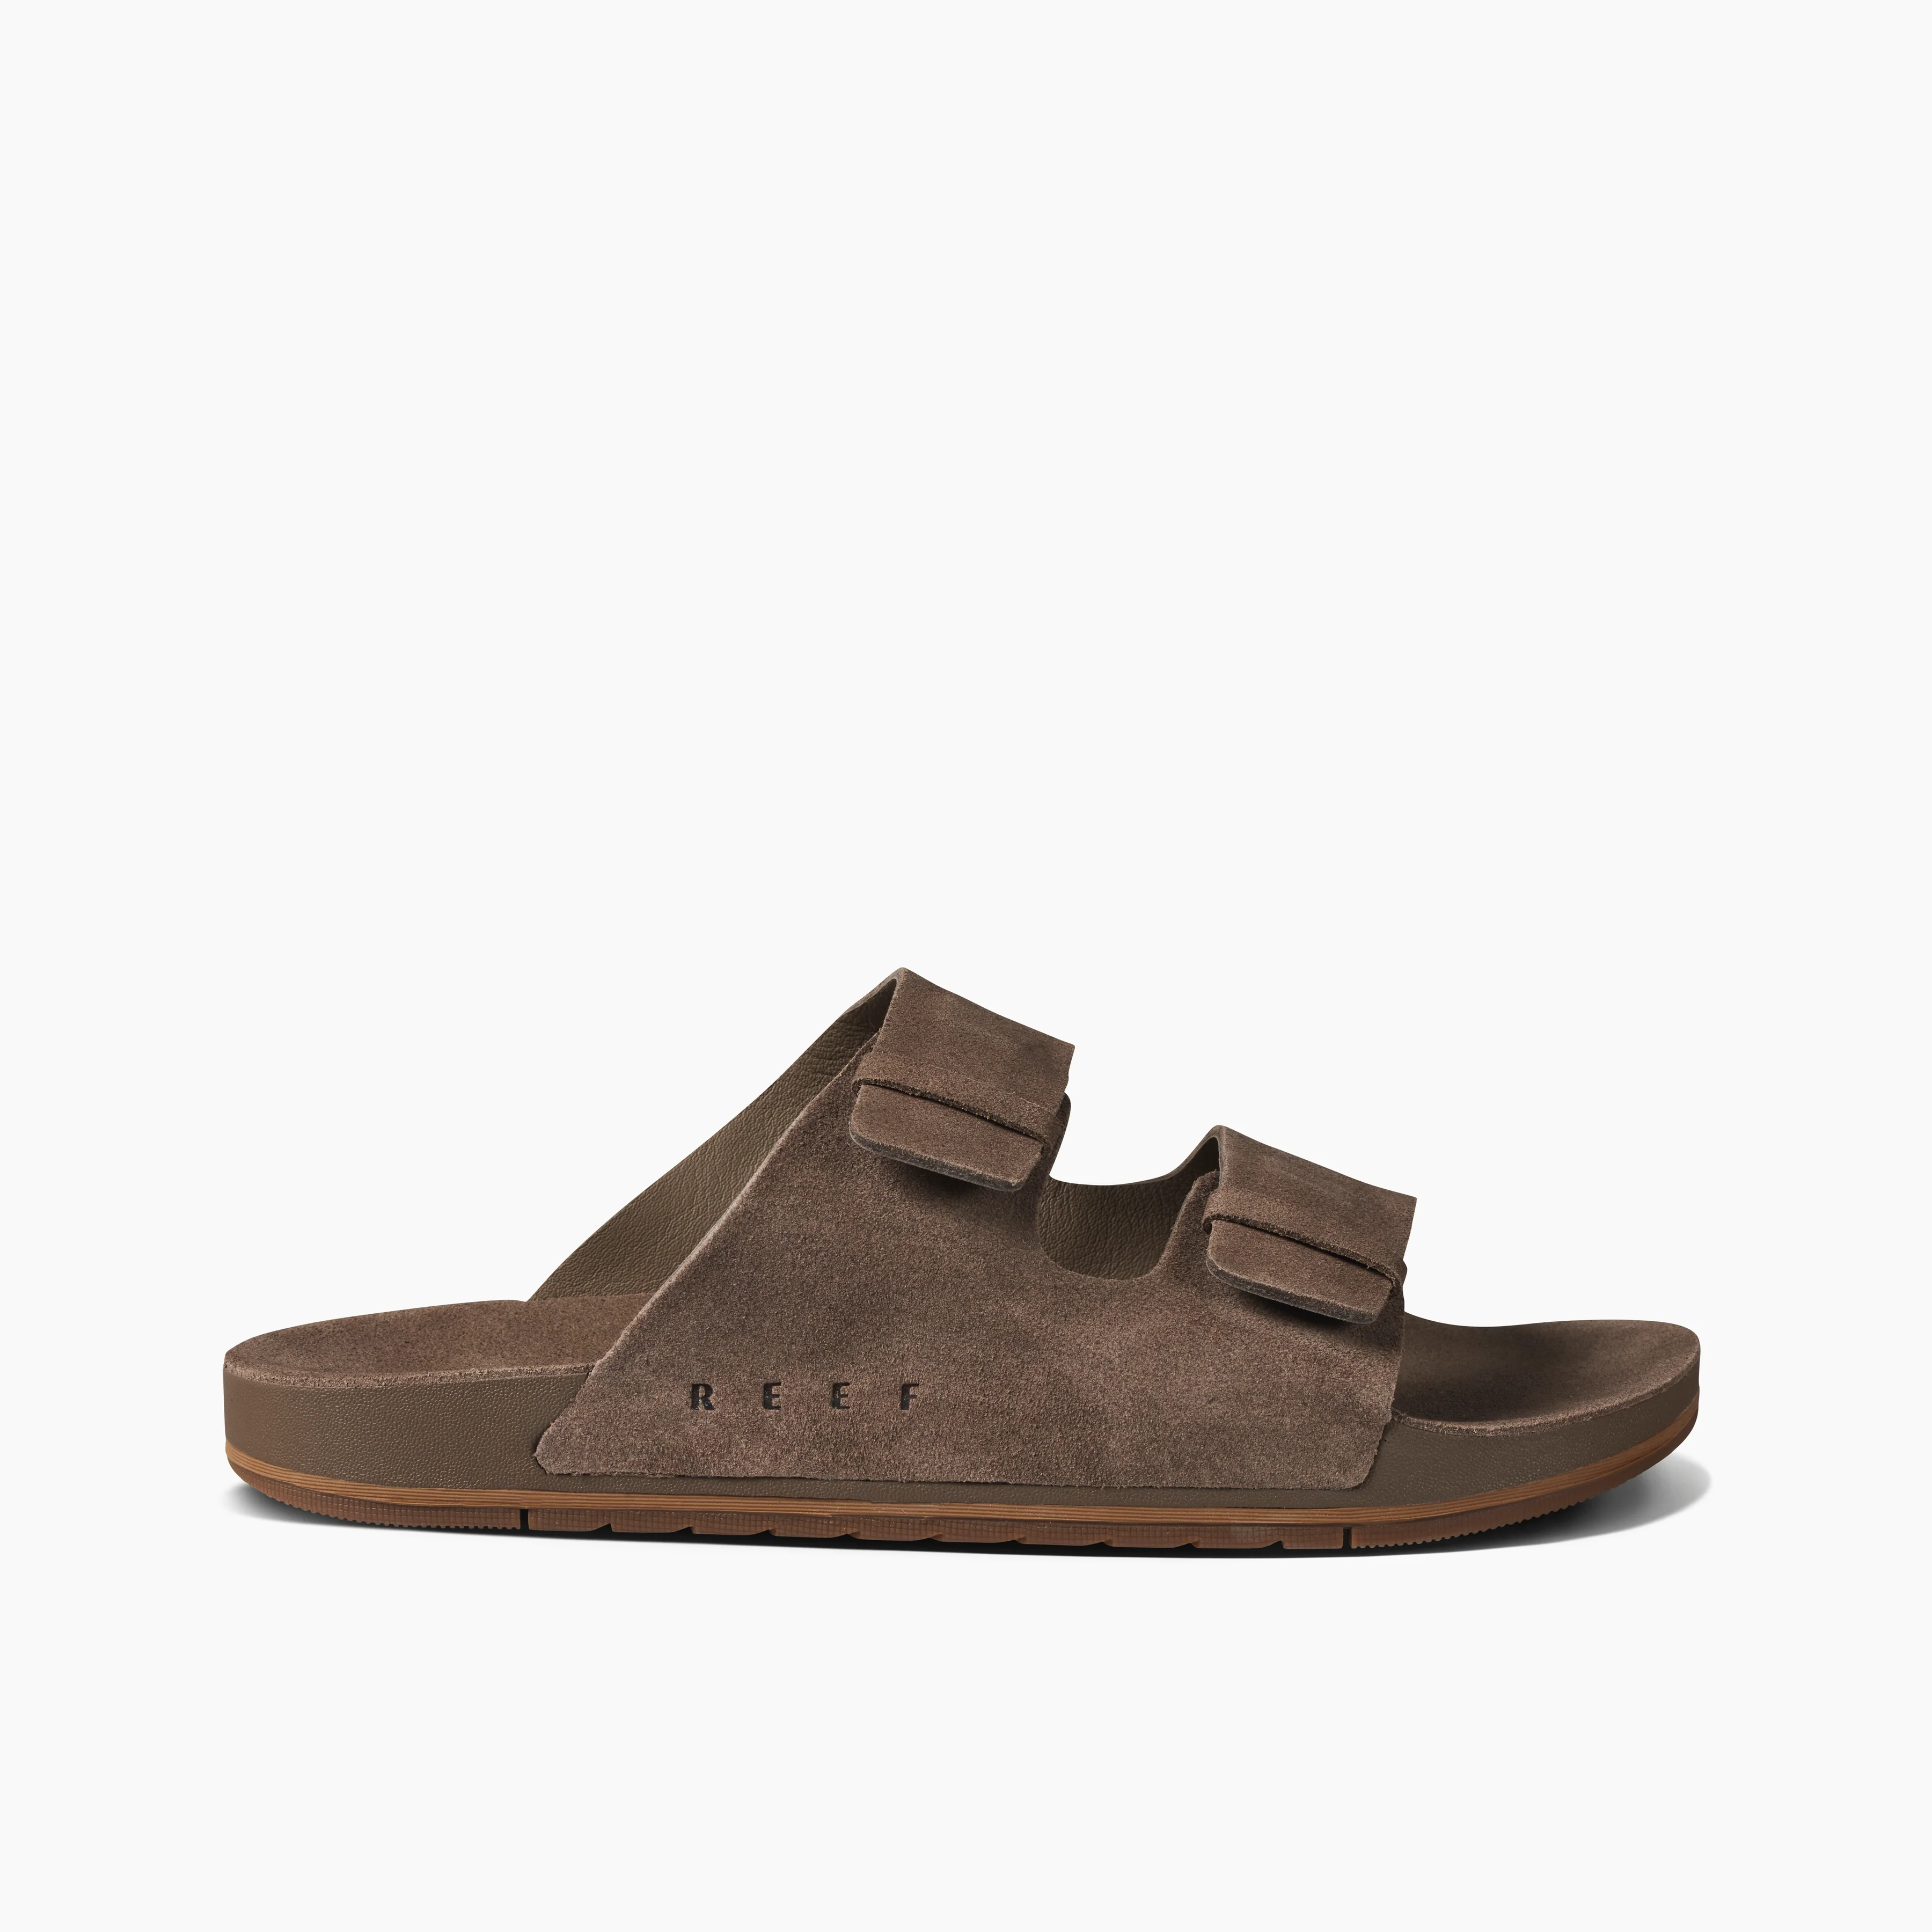 REEF leather sandals with double straps in light brown (Ojai two bar)